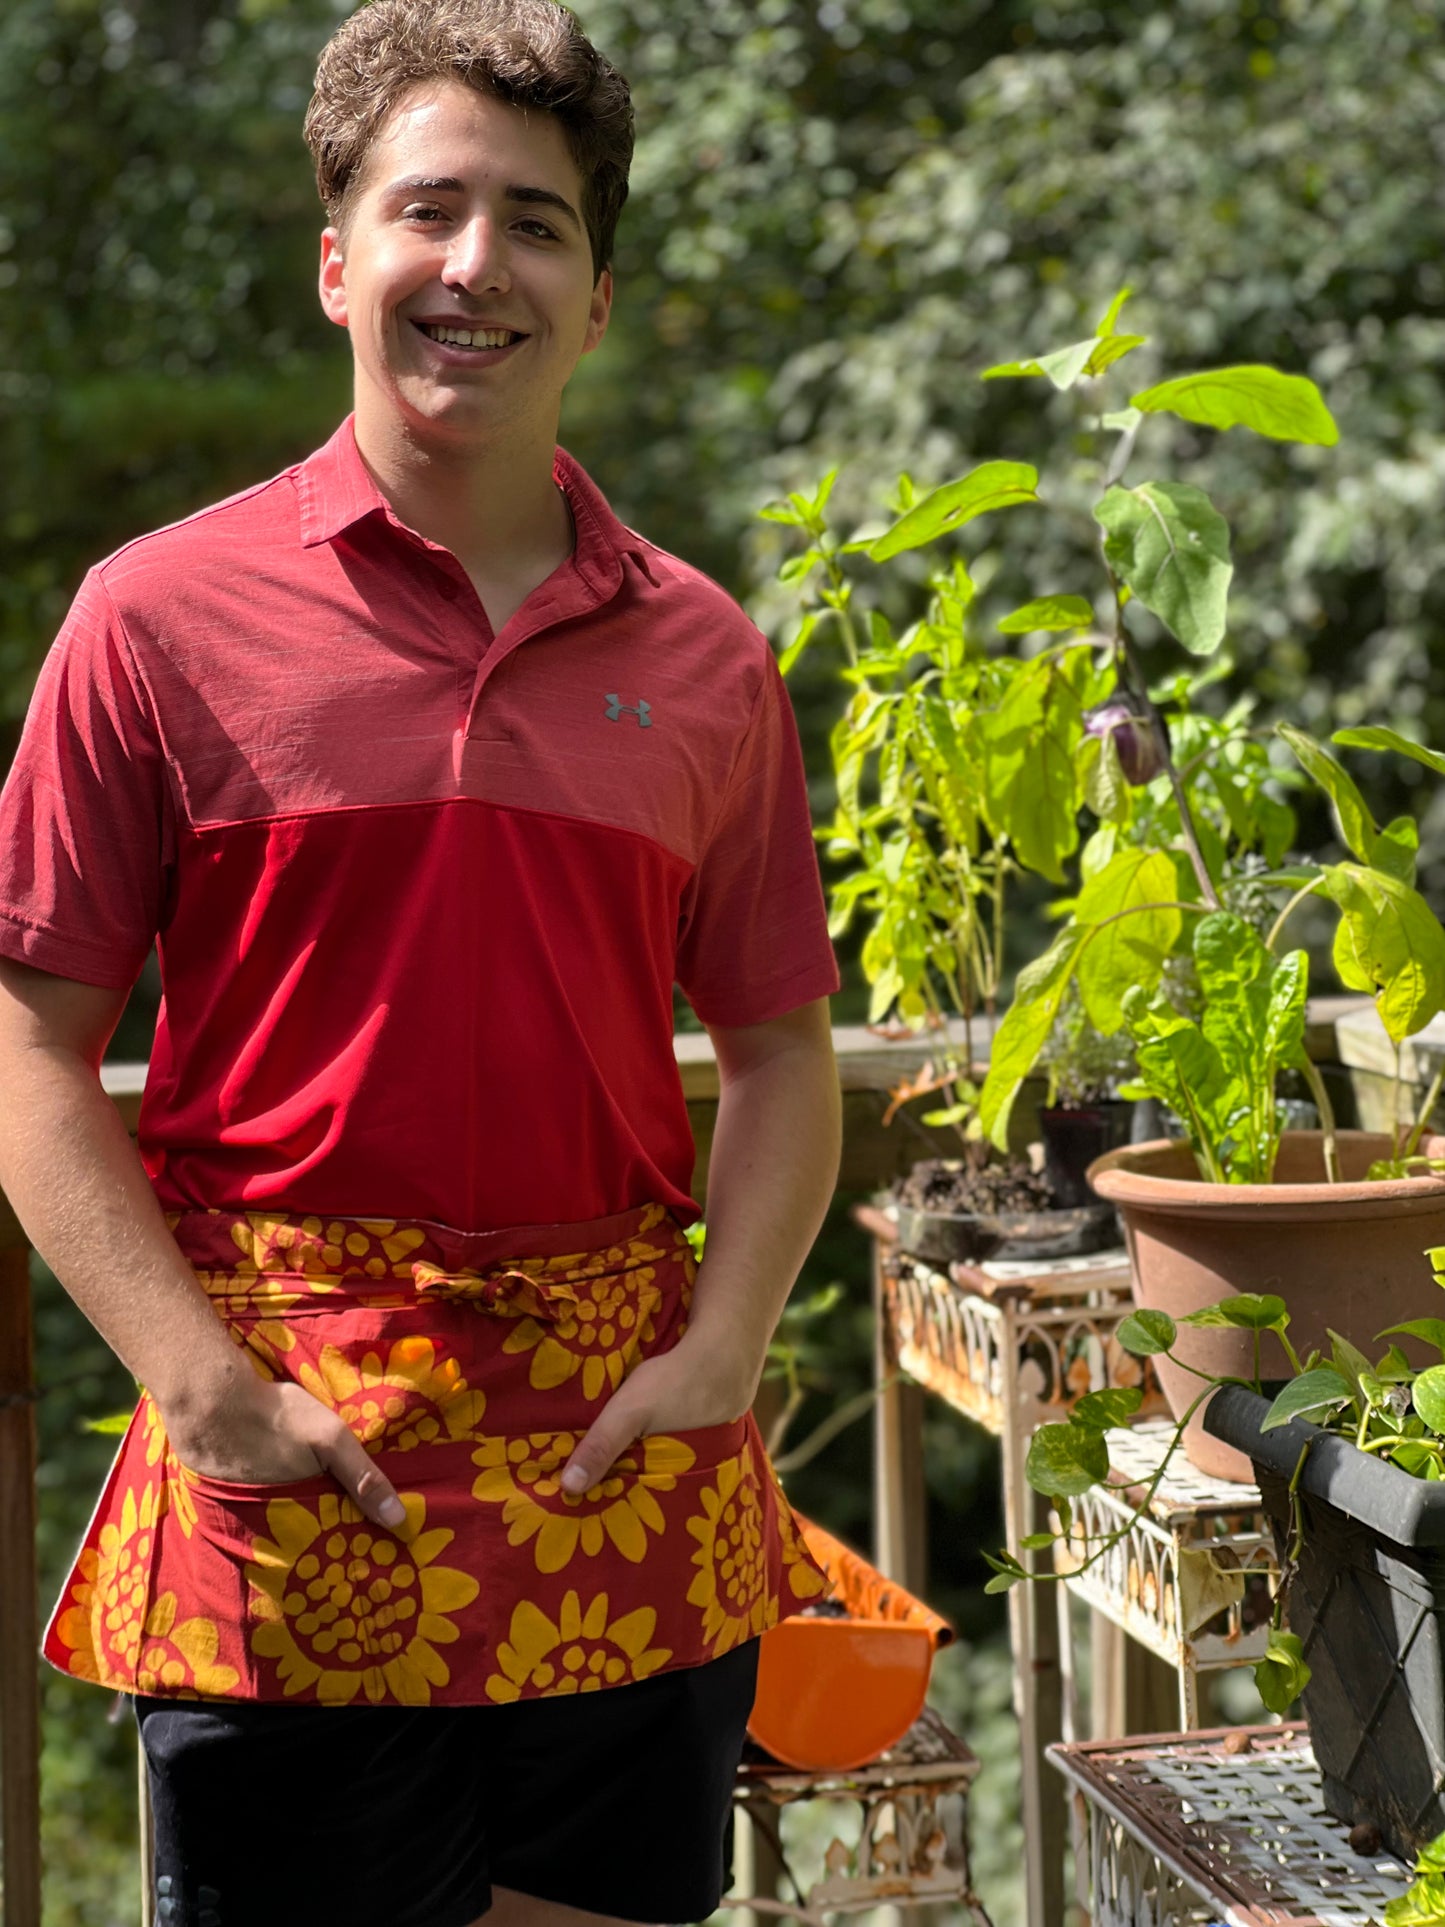 Sustainable Multi Pocket Aprons for Farmers, Gardeners, Teachers, Massage Therapist, Pet Groomers, Hair Stylists